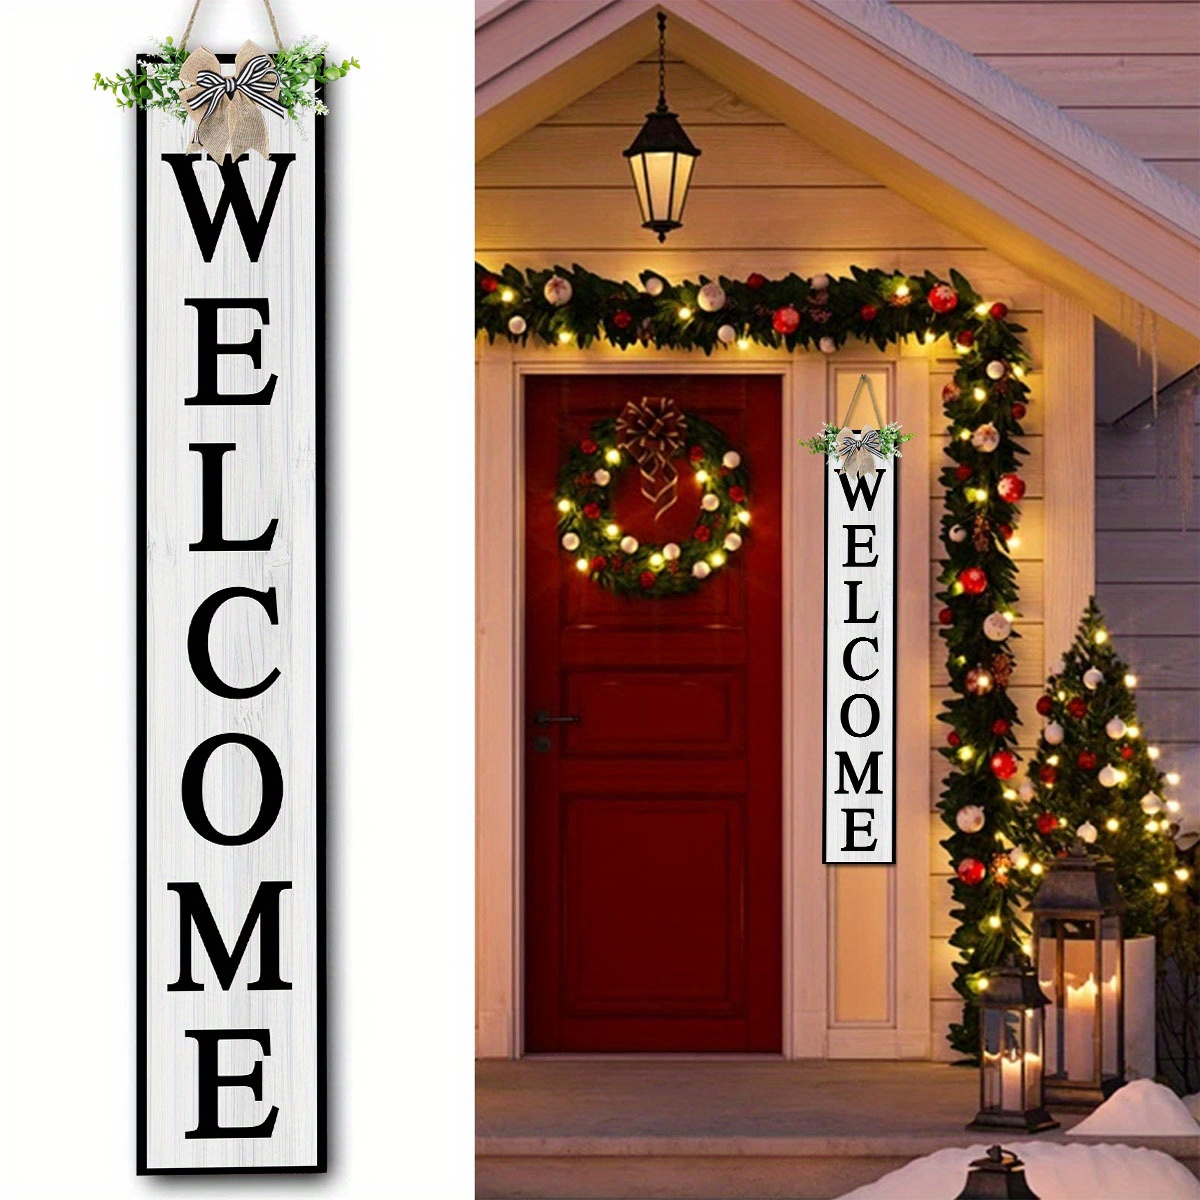 

1pc Rustic Wooden Welcome Sign For Porch - Handcrafted Festive Decor, 11.8 Inches, Farmhouse Style Holiday Wall Decor With Greenery Accents, Ideal For Home & Outdoor Use